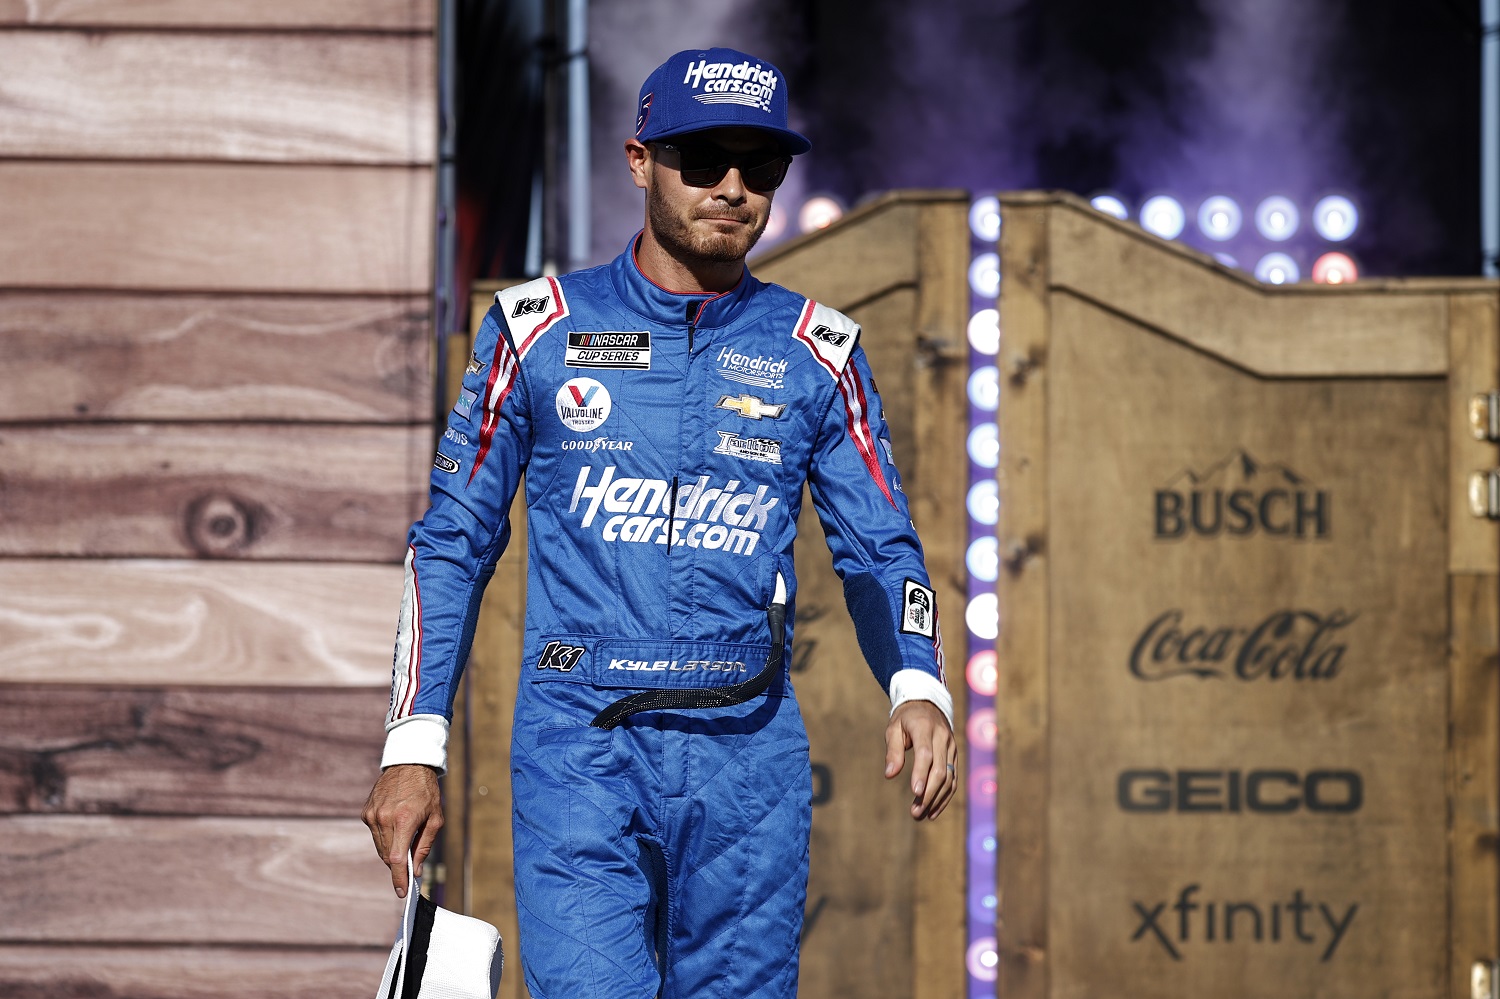 Kyle Larson walks on stage during driver introductions prior to the NASCAR All-Star Race at Texas Motor Speedway.